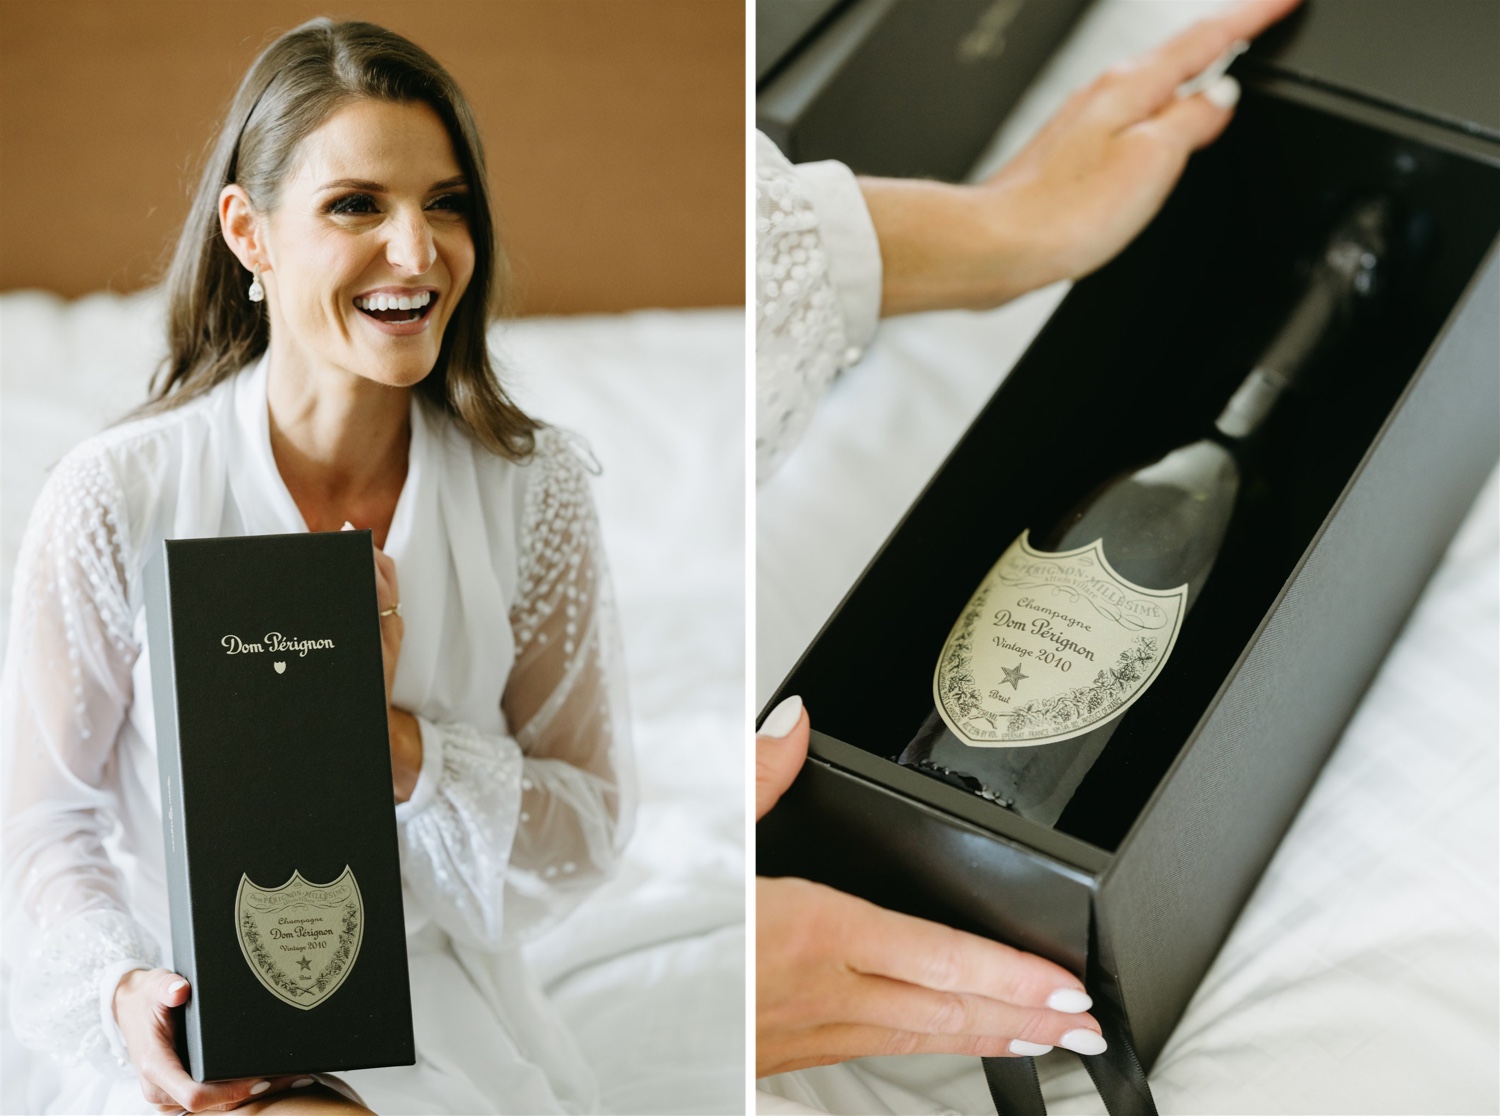 don perigon champagne wedding day gift to bride from groom bride posing with box